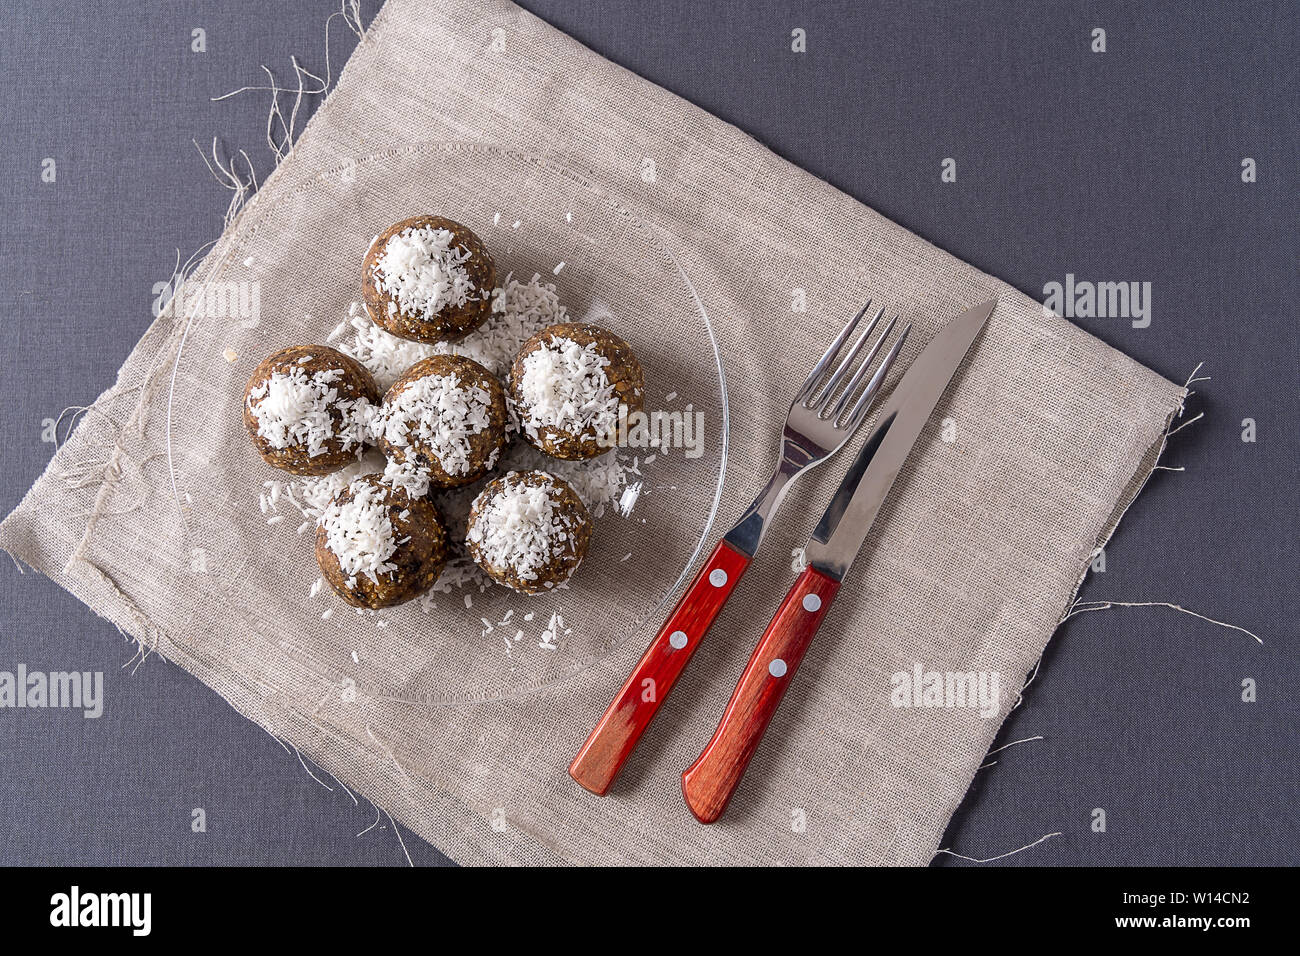 Healthy organic energy balls made with dates, prunes, raisins, peanut, with coconut shavings, in a glass plate on gray background, flat lay. Stock Photo